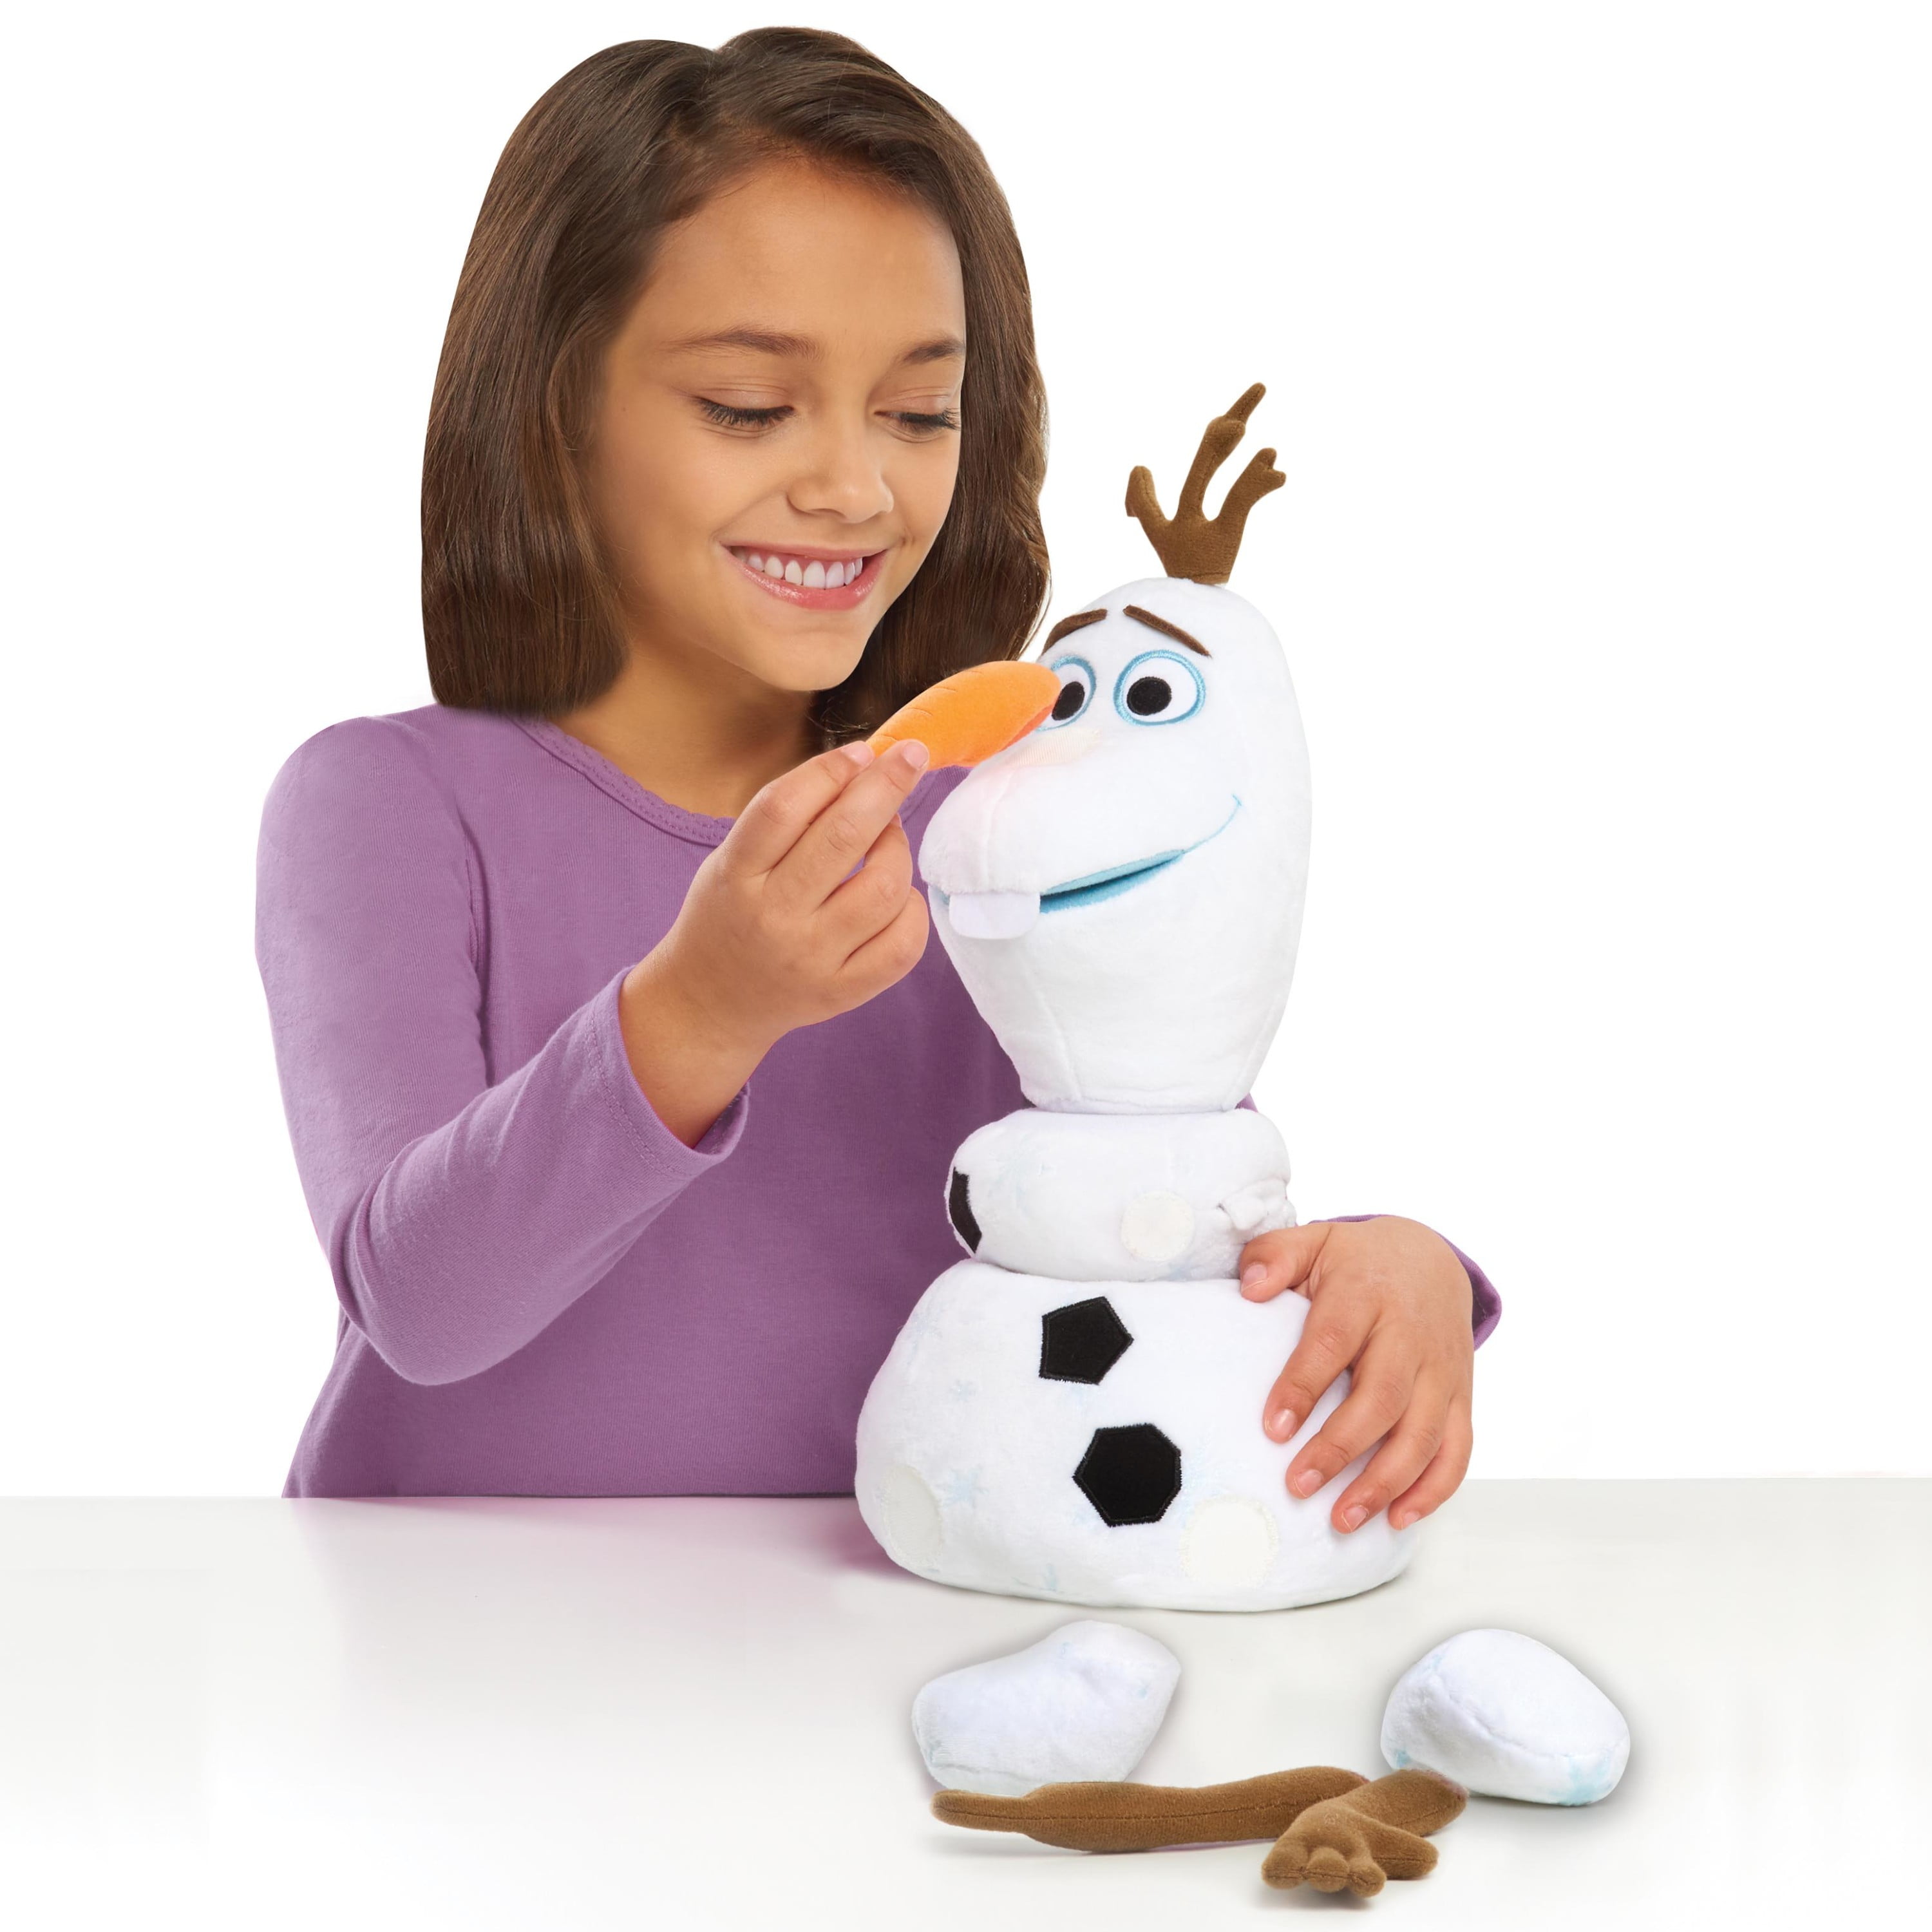 Disney\'s Frozen Officially for Up, 3 Ages Presents and Shape 2 Gifts Plush, Shifter Kids Toys Olaf Licensed